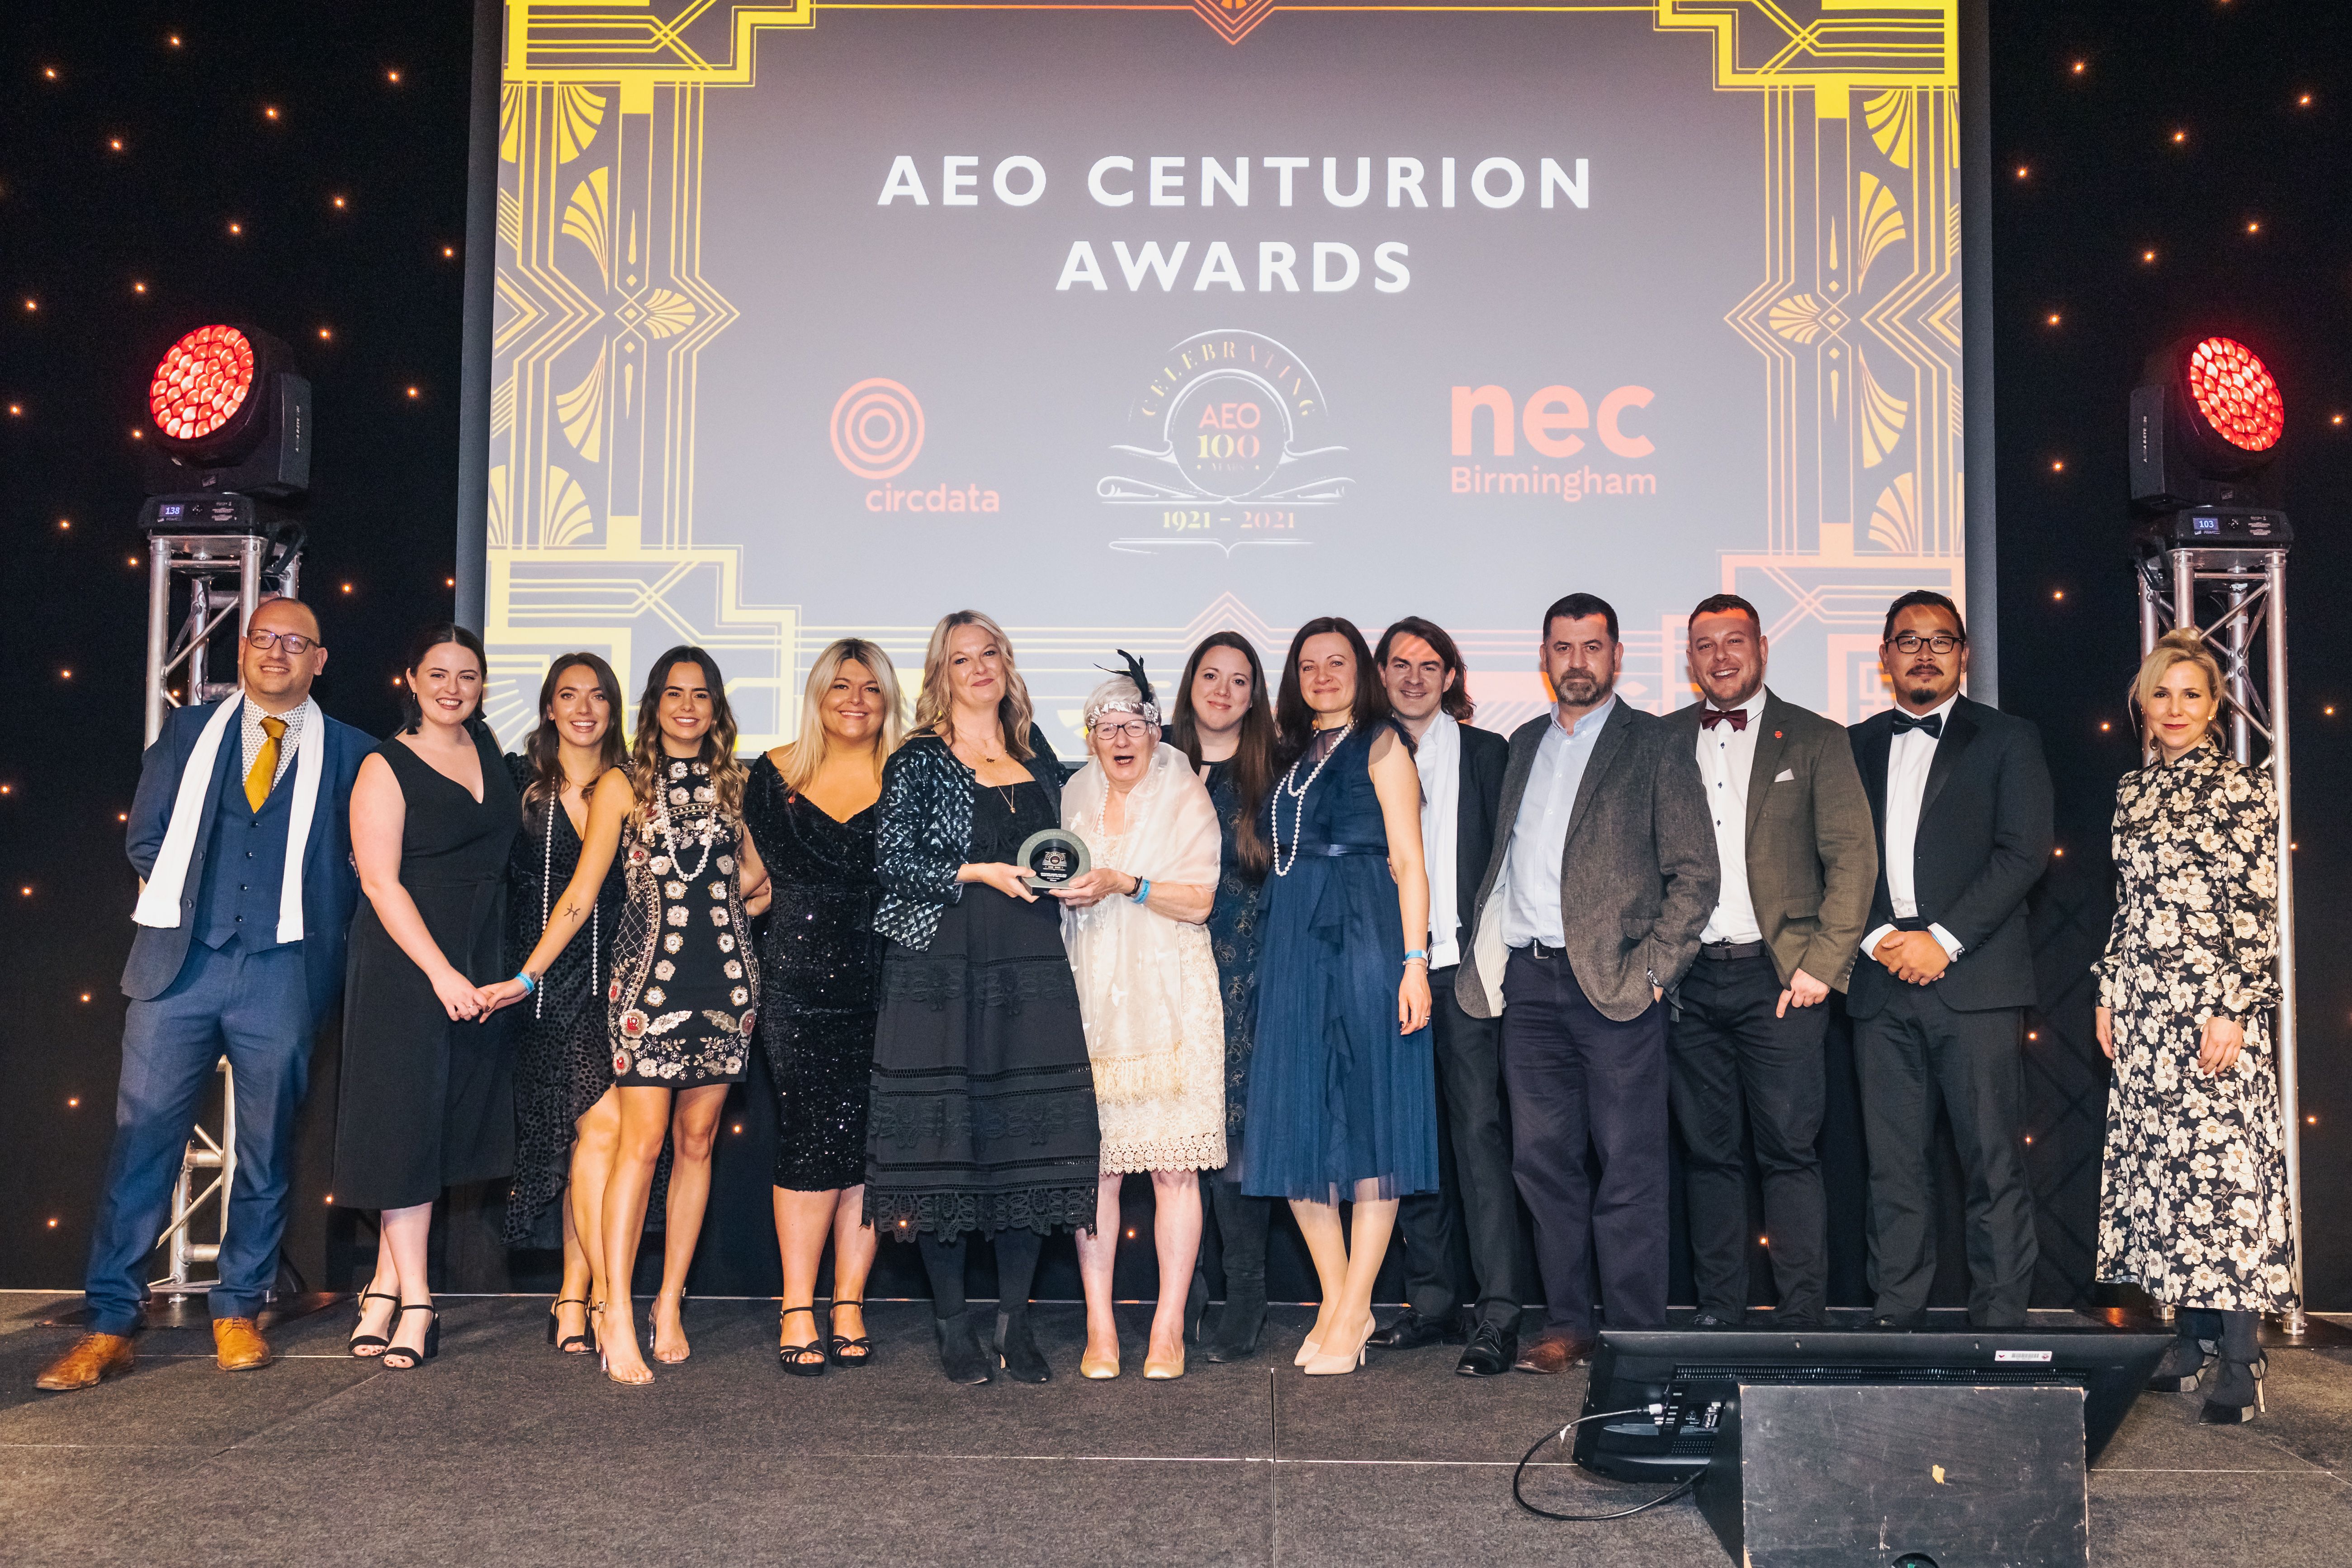 Above: Spring Fair received a Trade Show of the Century Award at The AEO (Association of Event Organisers) Centenary Party & Awards. It was the first to take place at the NEC when it opened in 1976.